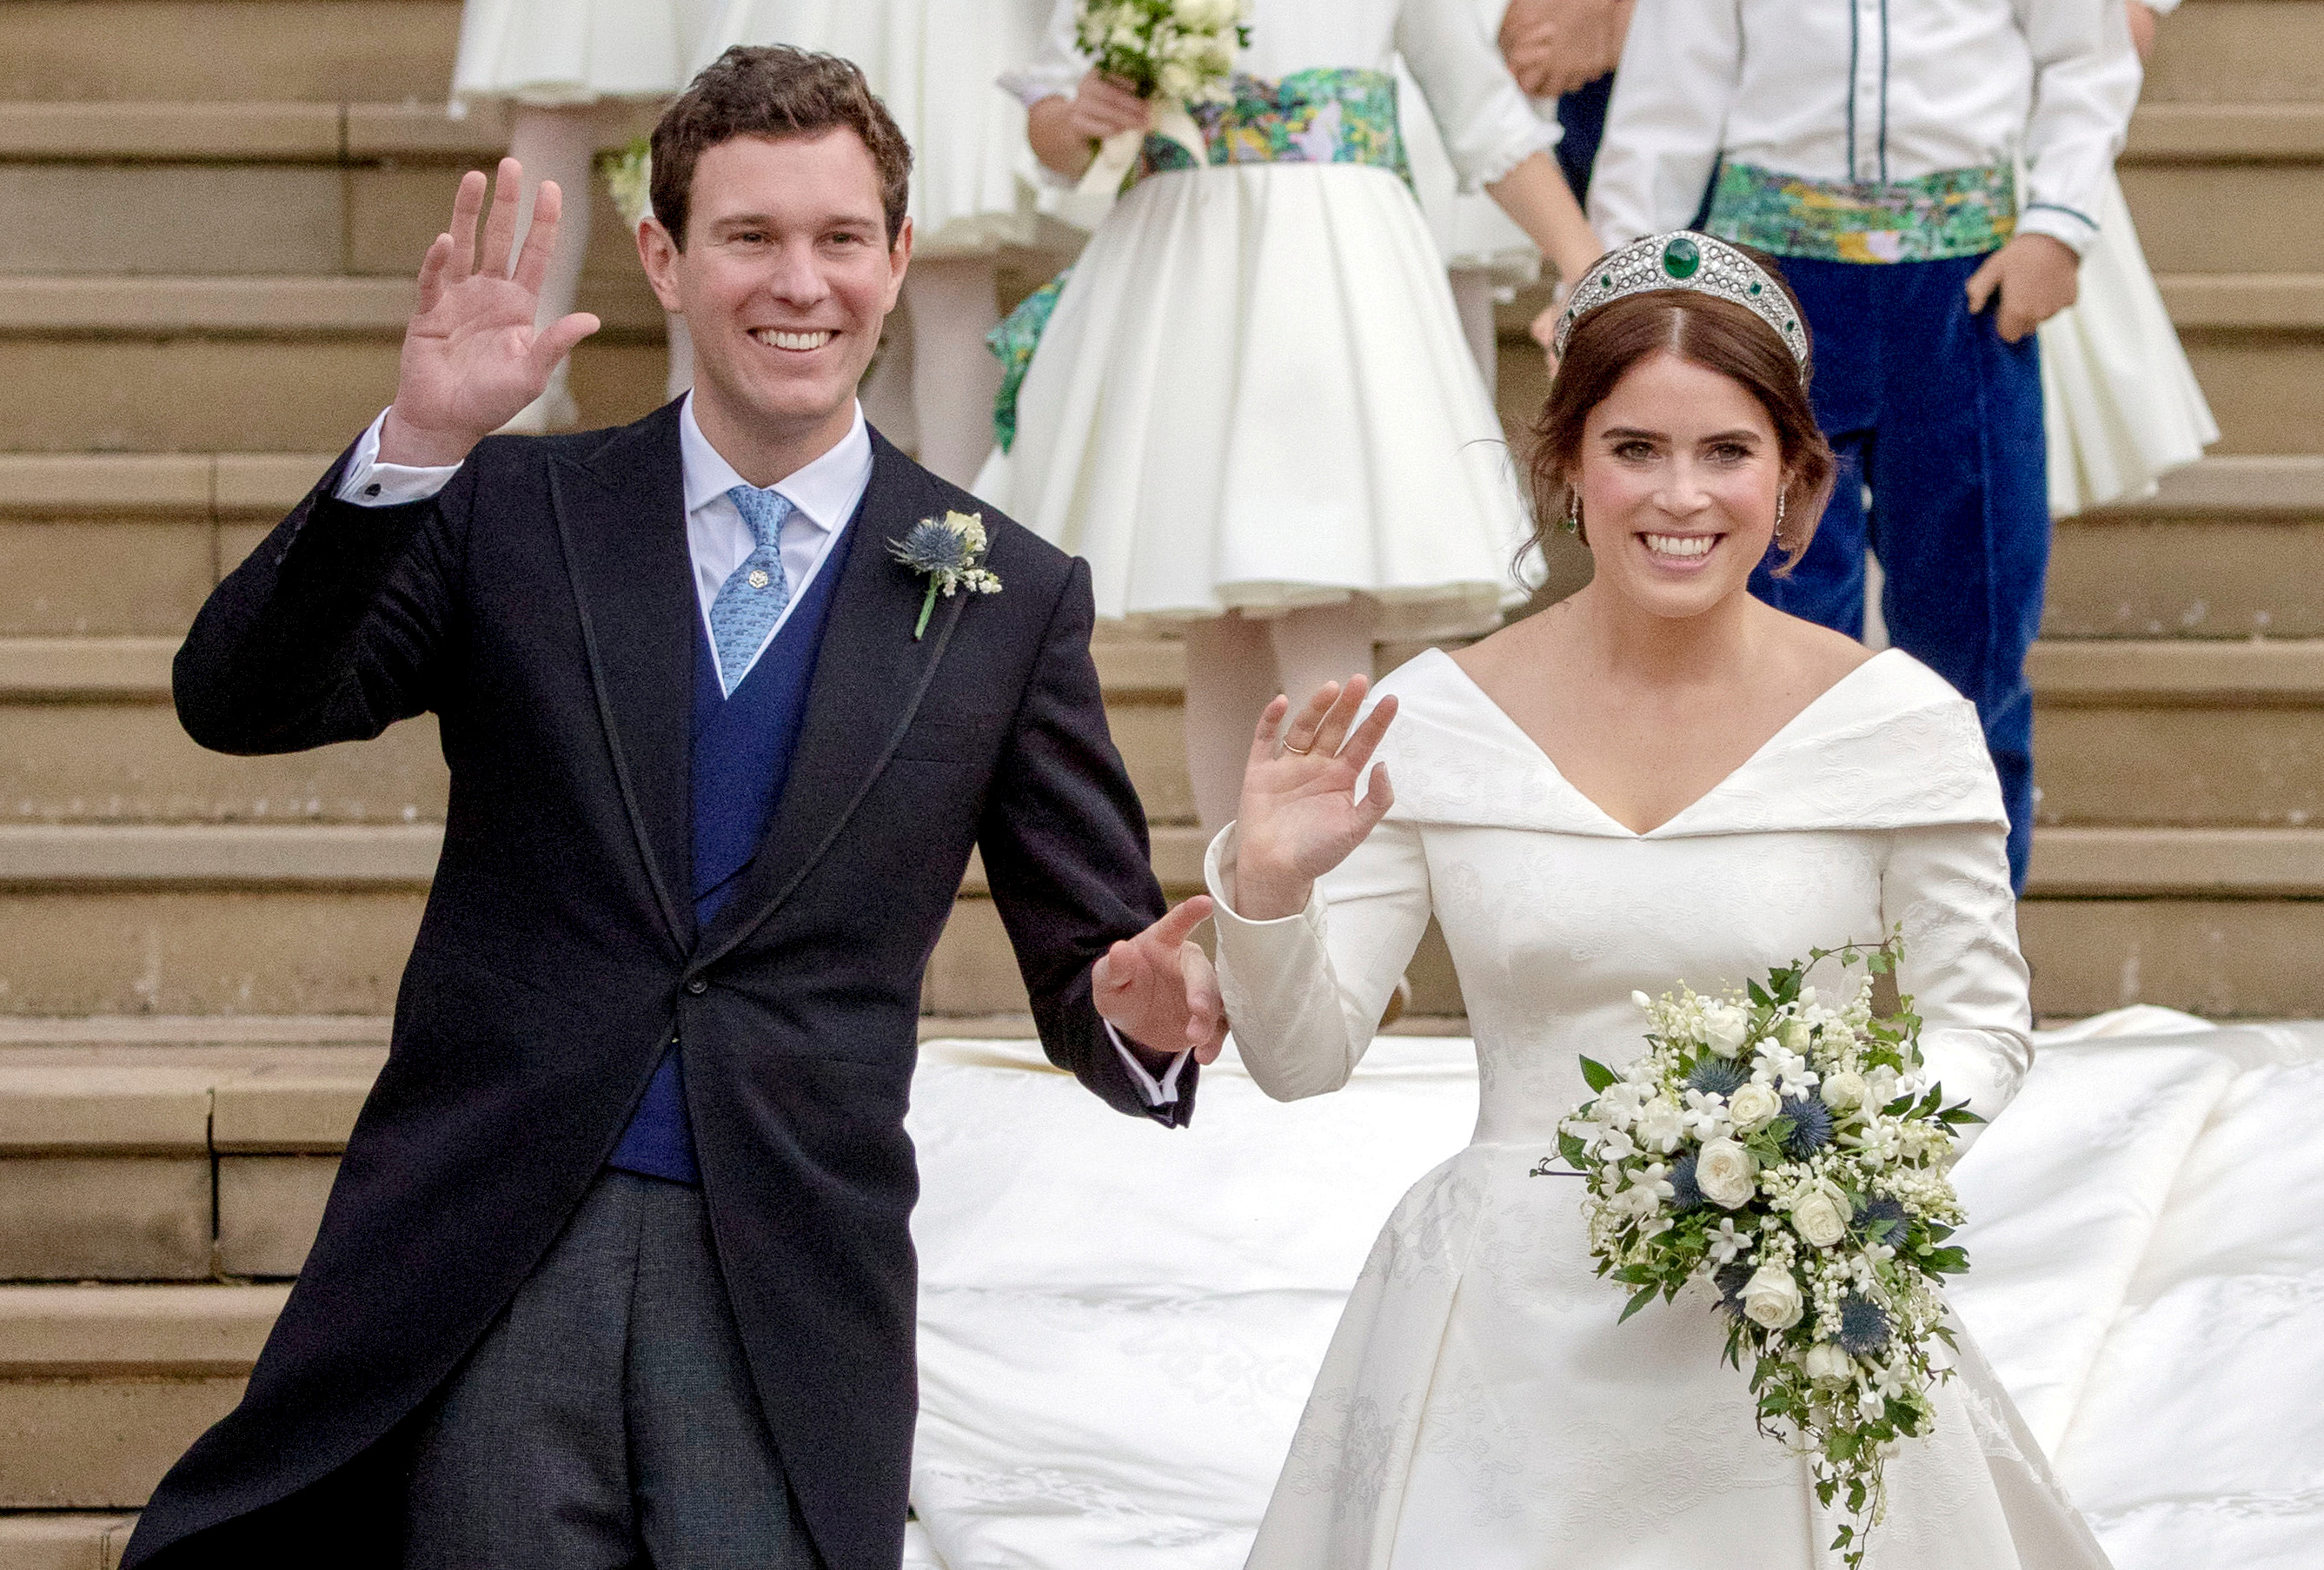 Princess Eugenie, 32, returns to work following birth of her son